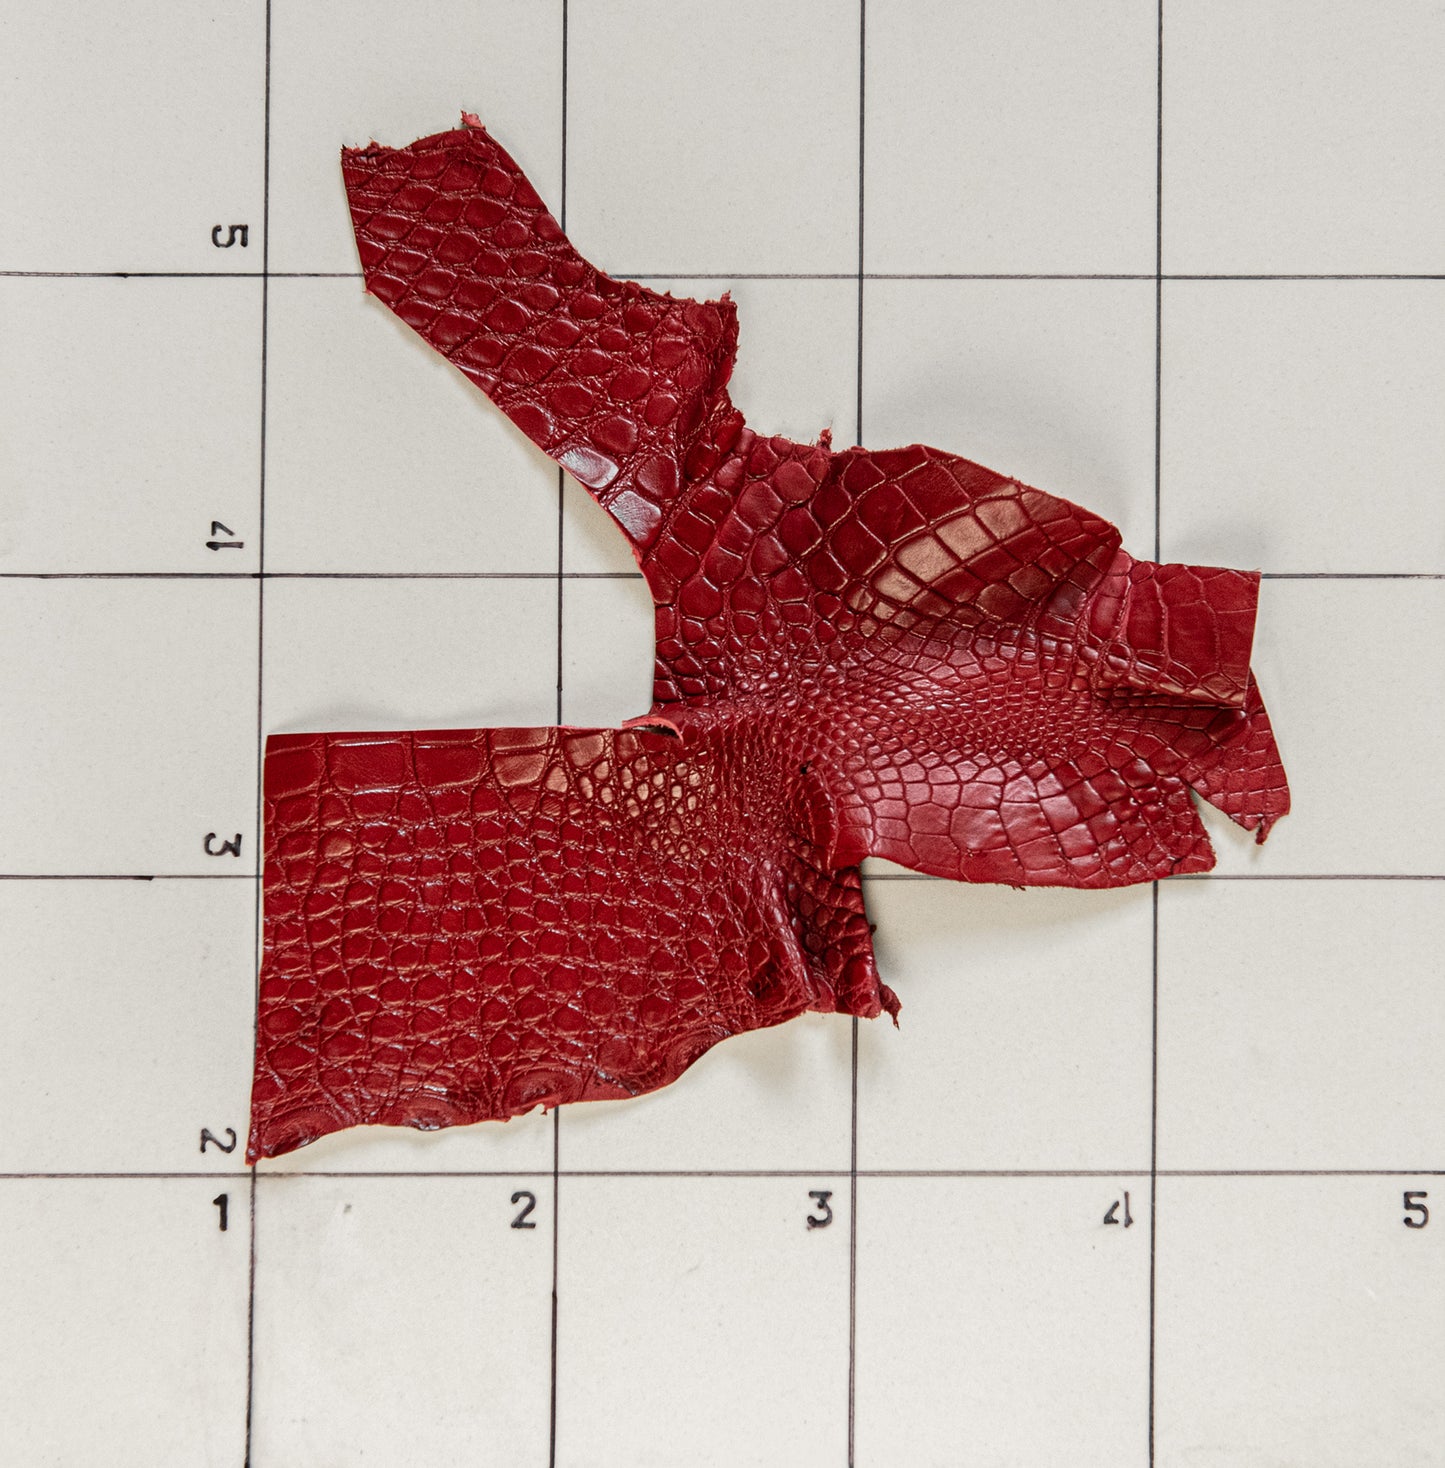 Alligator Red, legs and parts